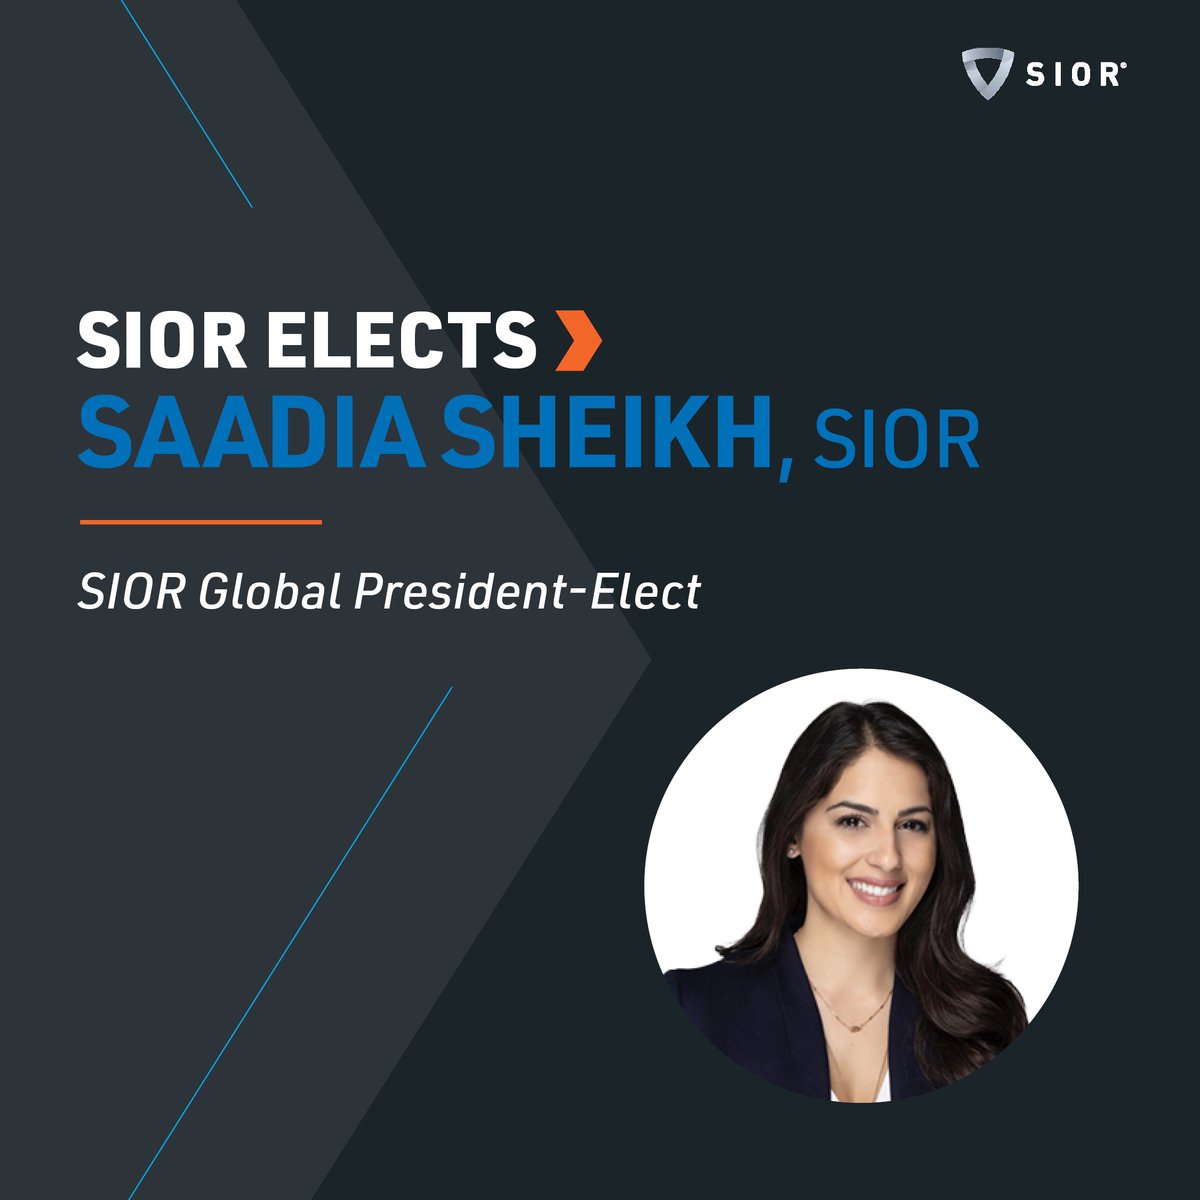 Thrilled to share that @TheSaadiaSheikh, SIOR, has been elected to serve as #SIOR President-Elect. She'll be inducted this fall & serve a 1-year term before becoming president in fall 2025—the youngest female SIOR member to ever hold this role. Congrats!